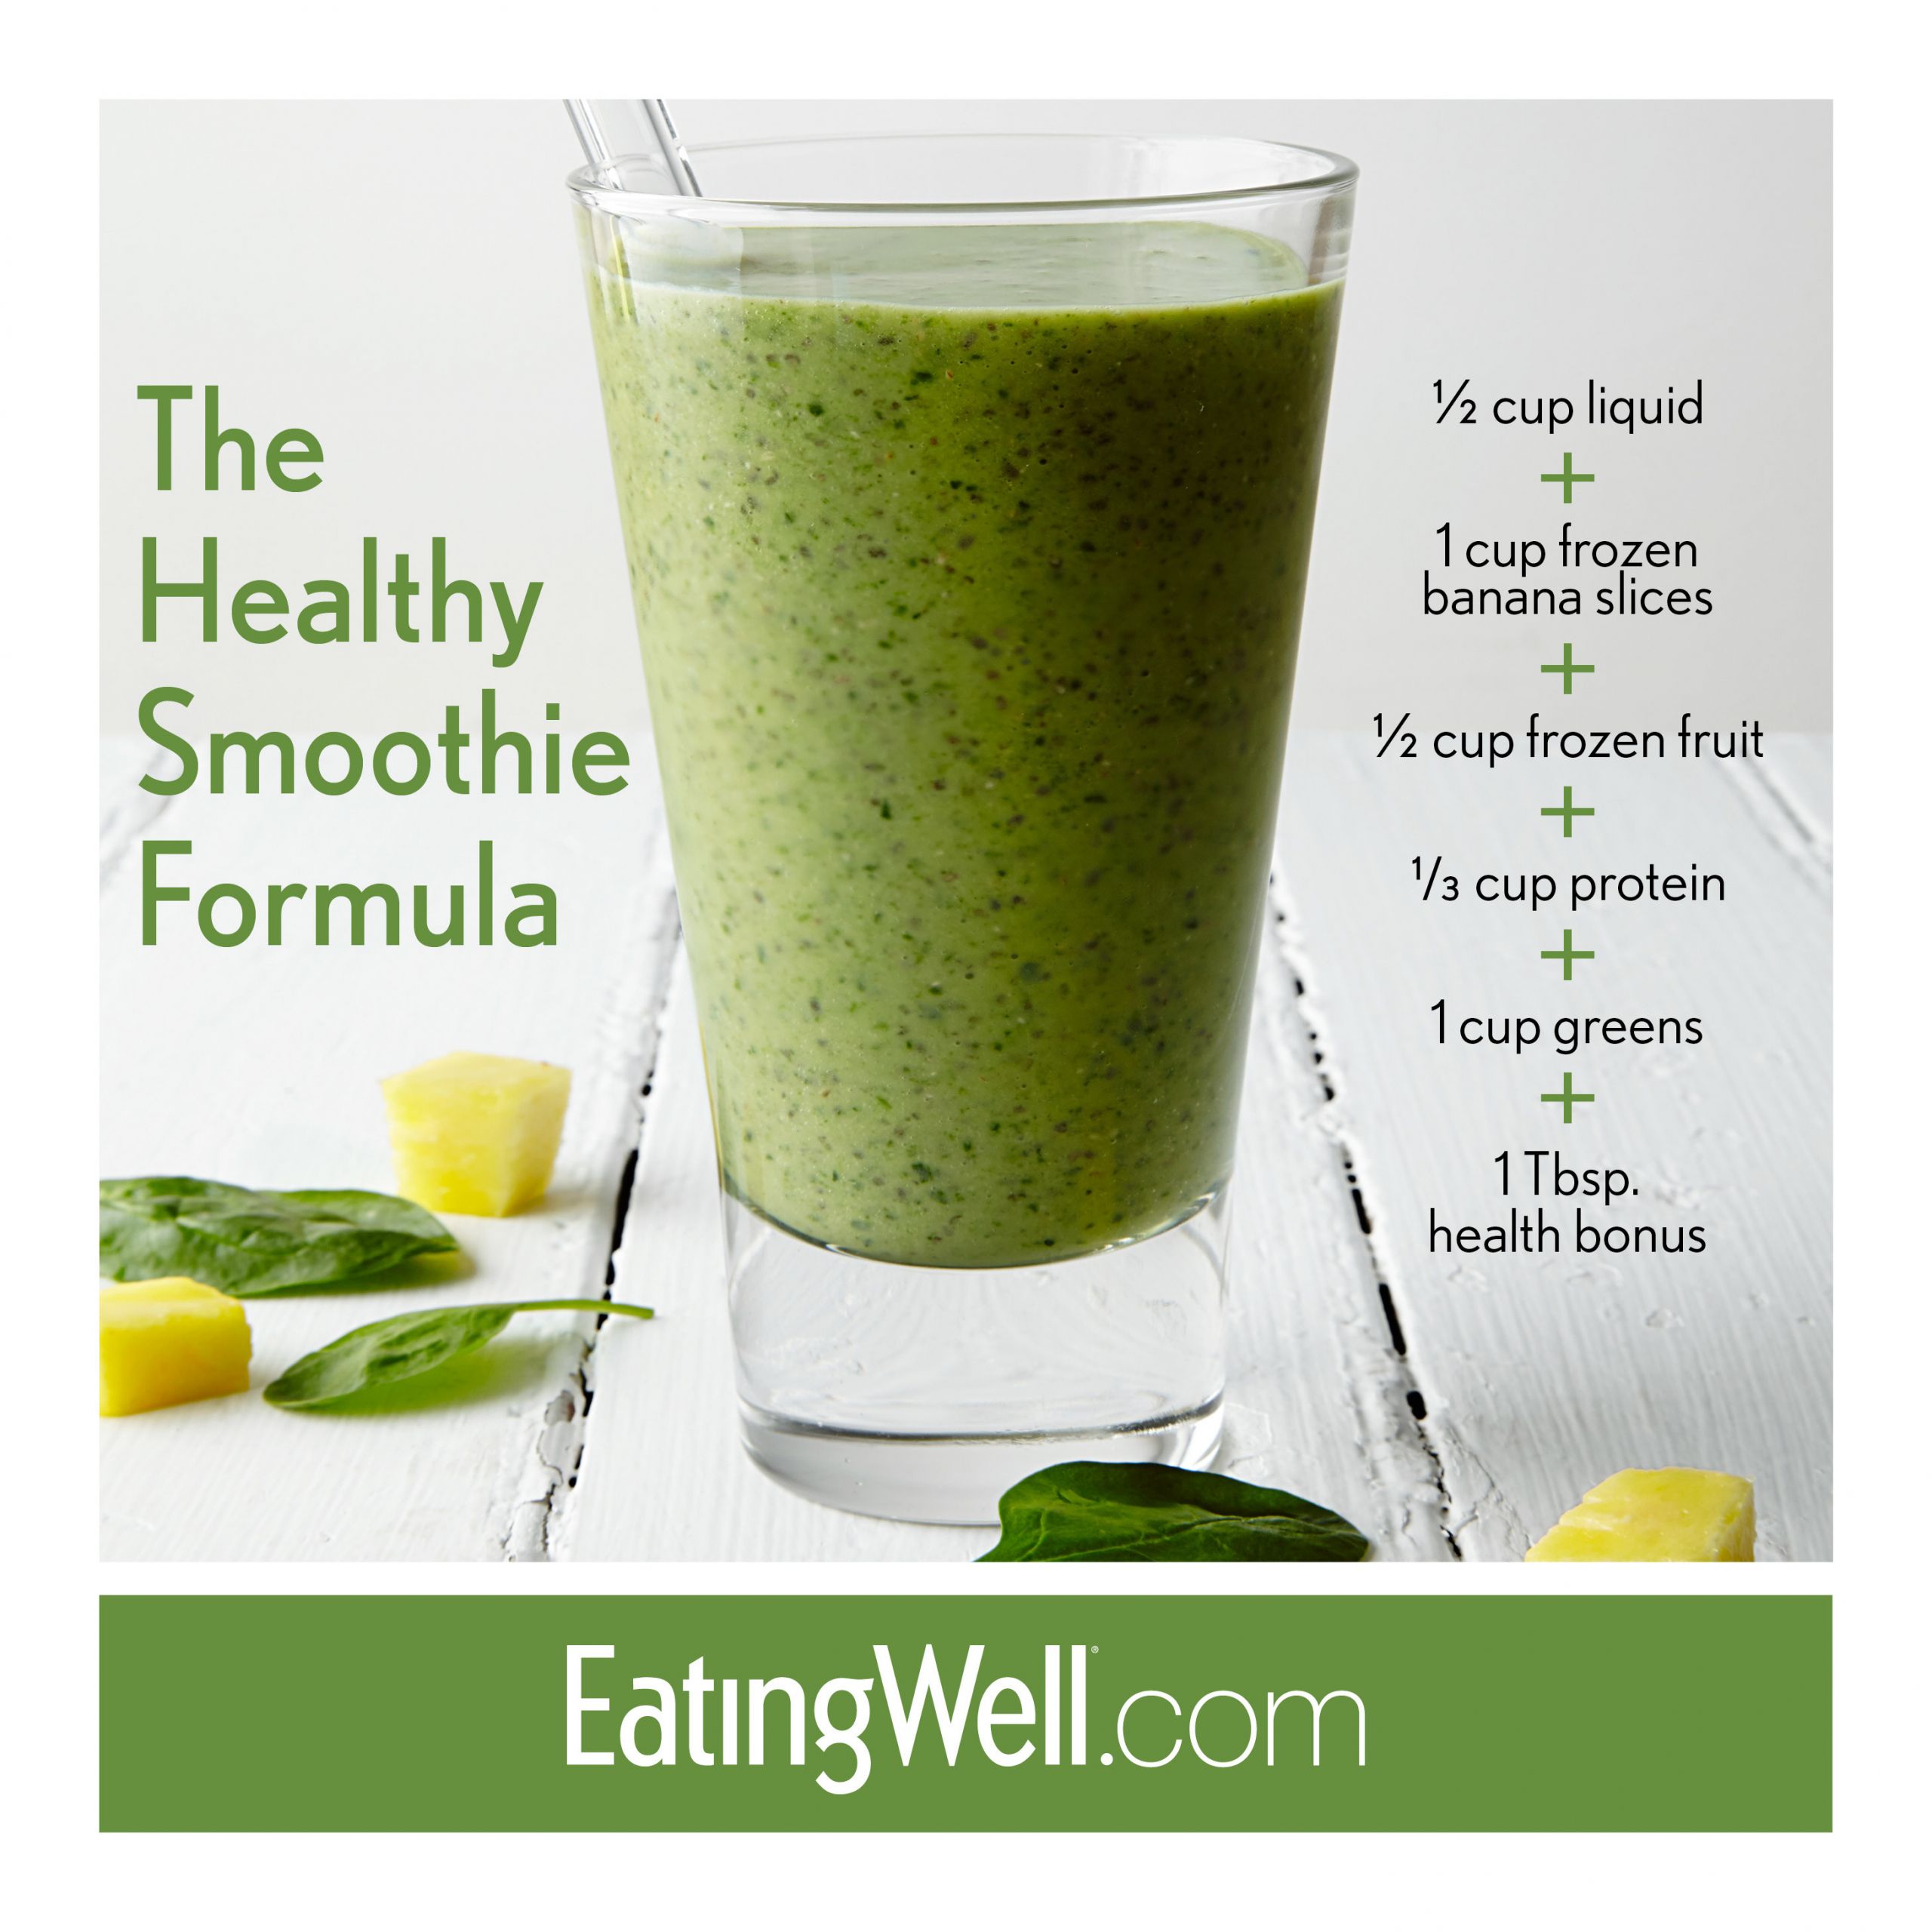 Simple Healthy Smoothie Recipes
 The Ultimate Green Smoothie Recipe